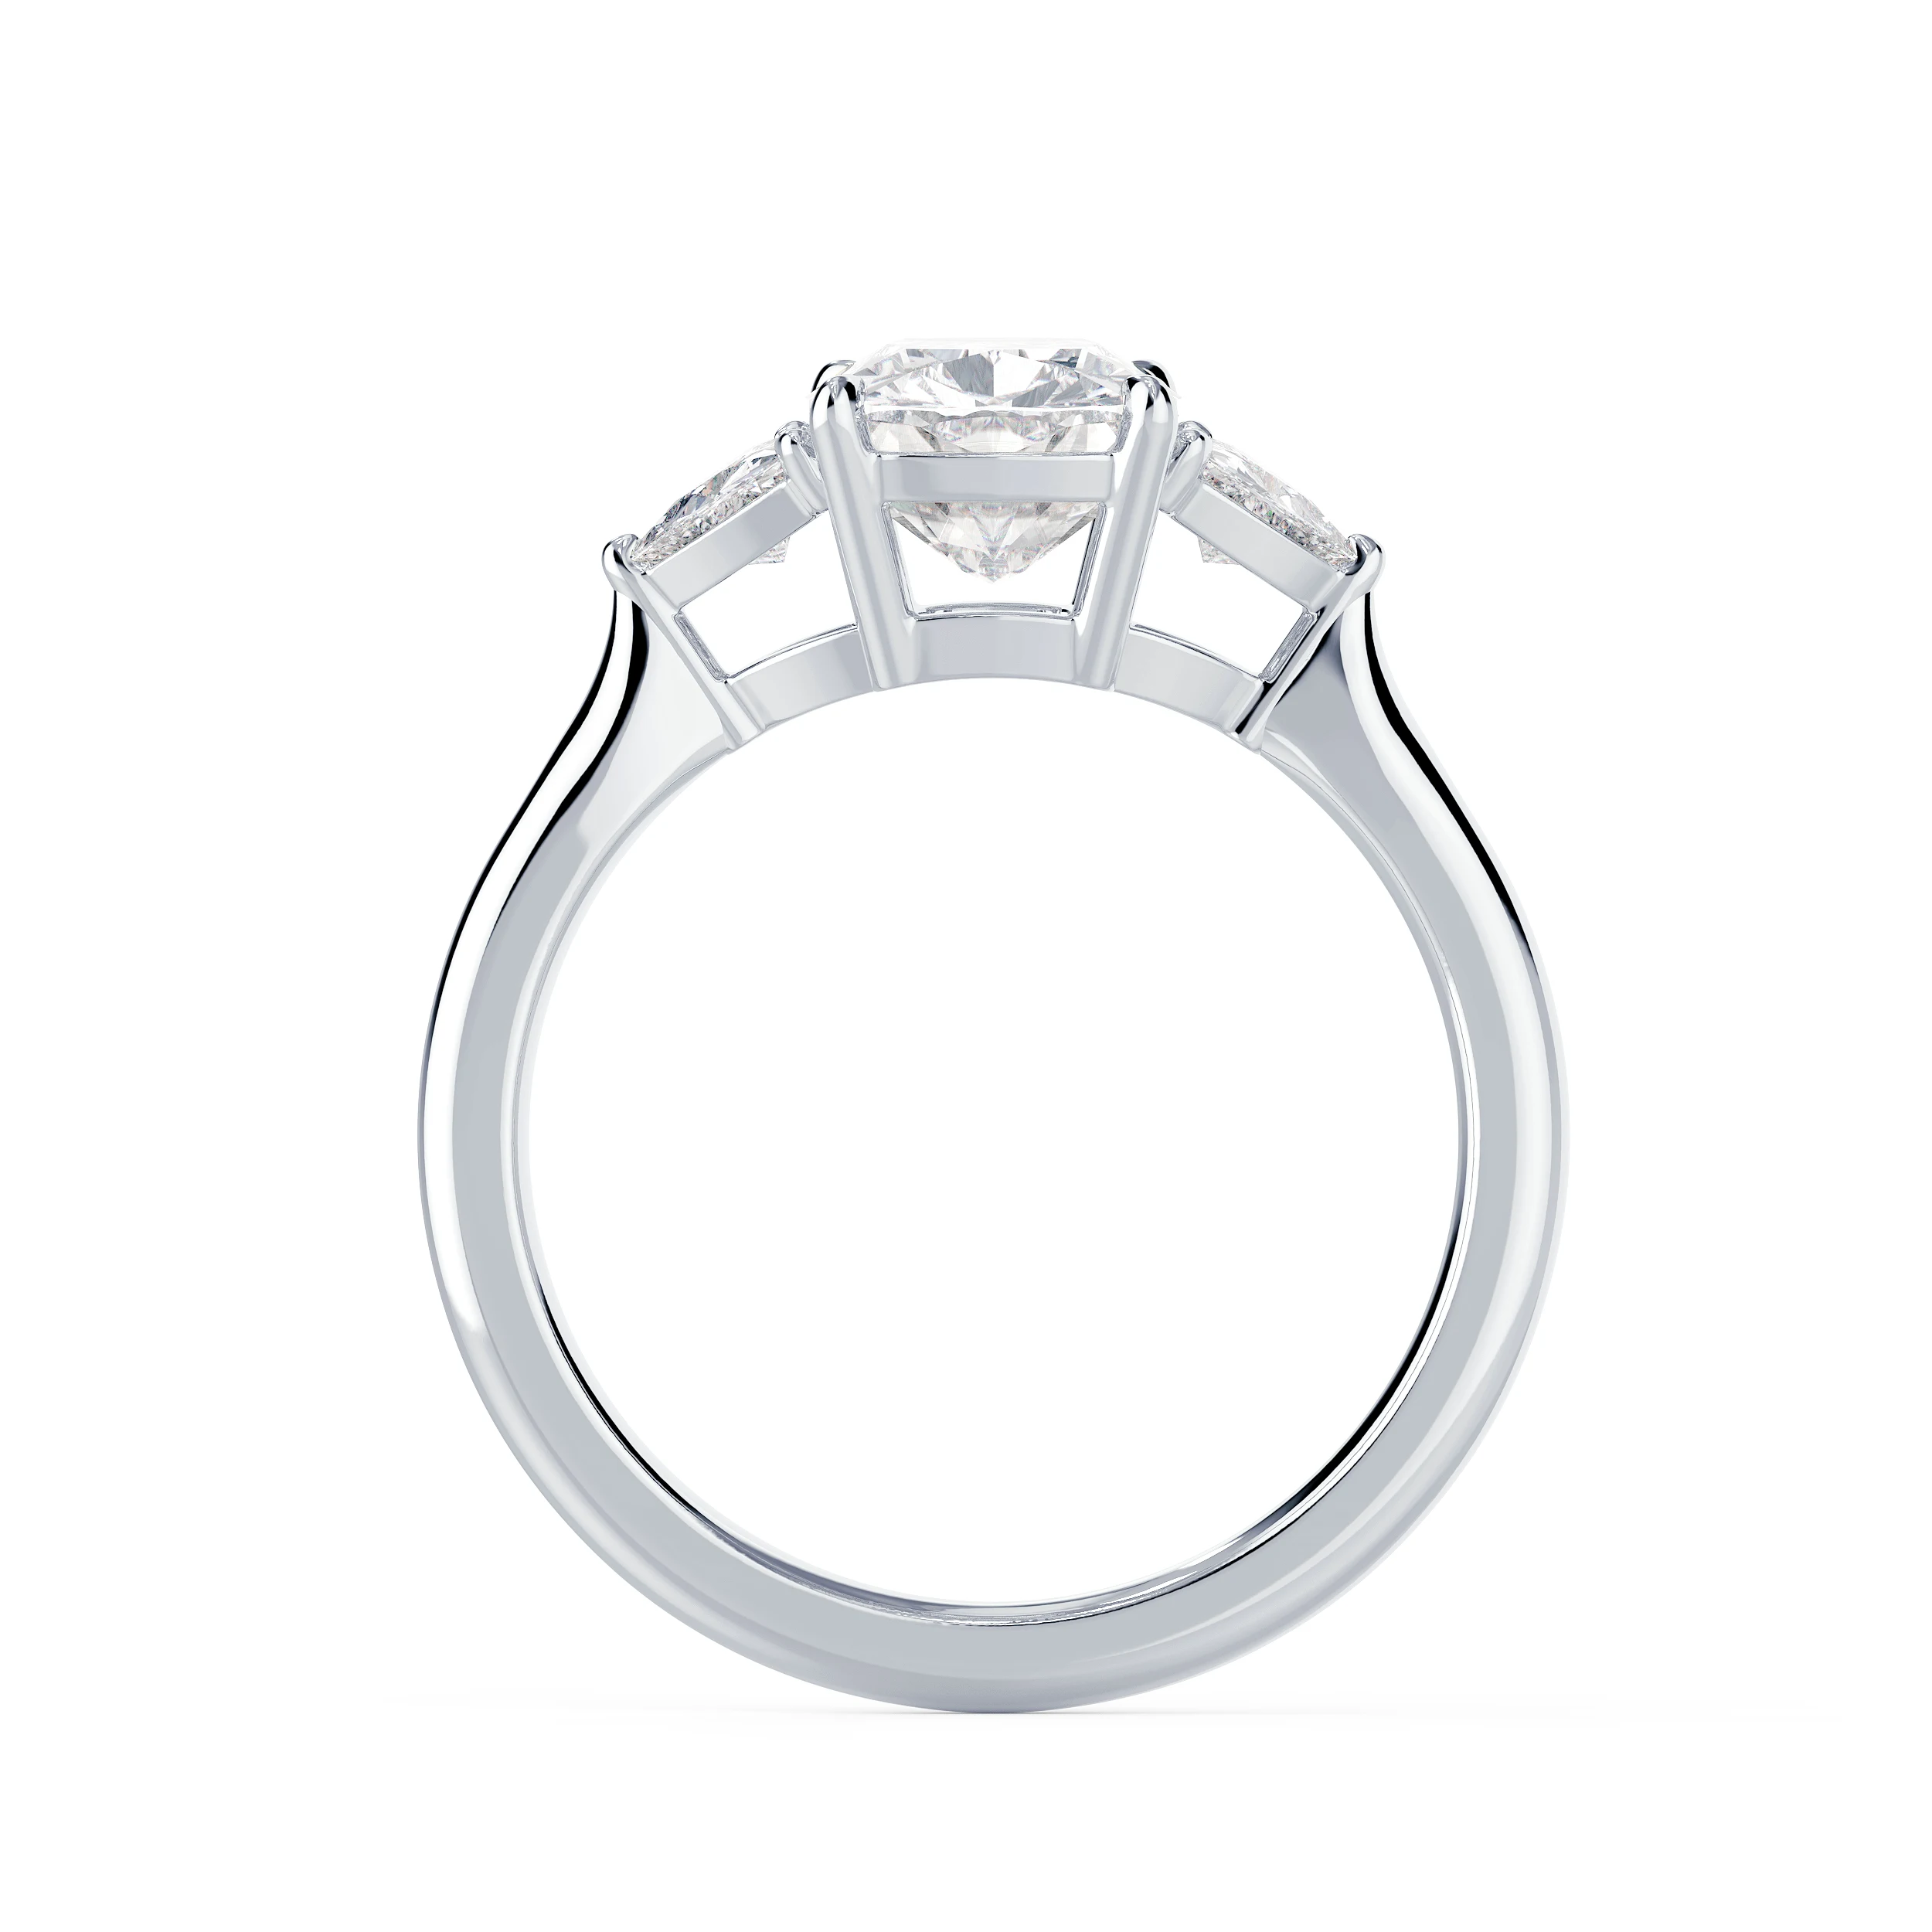 Diamonds set in White Gold Cushion and Trillion Diamond Engagement Ring (Profile View)